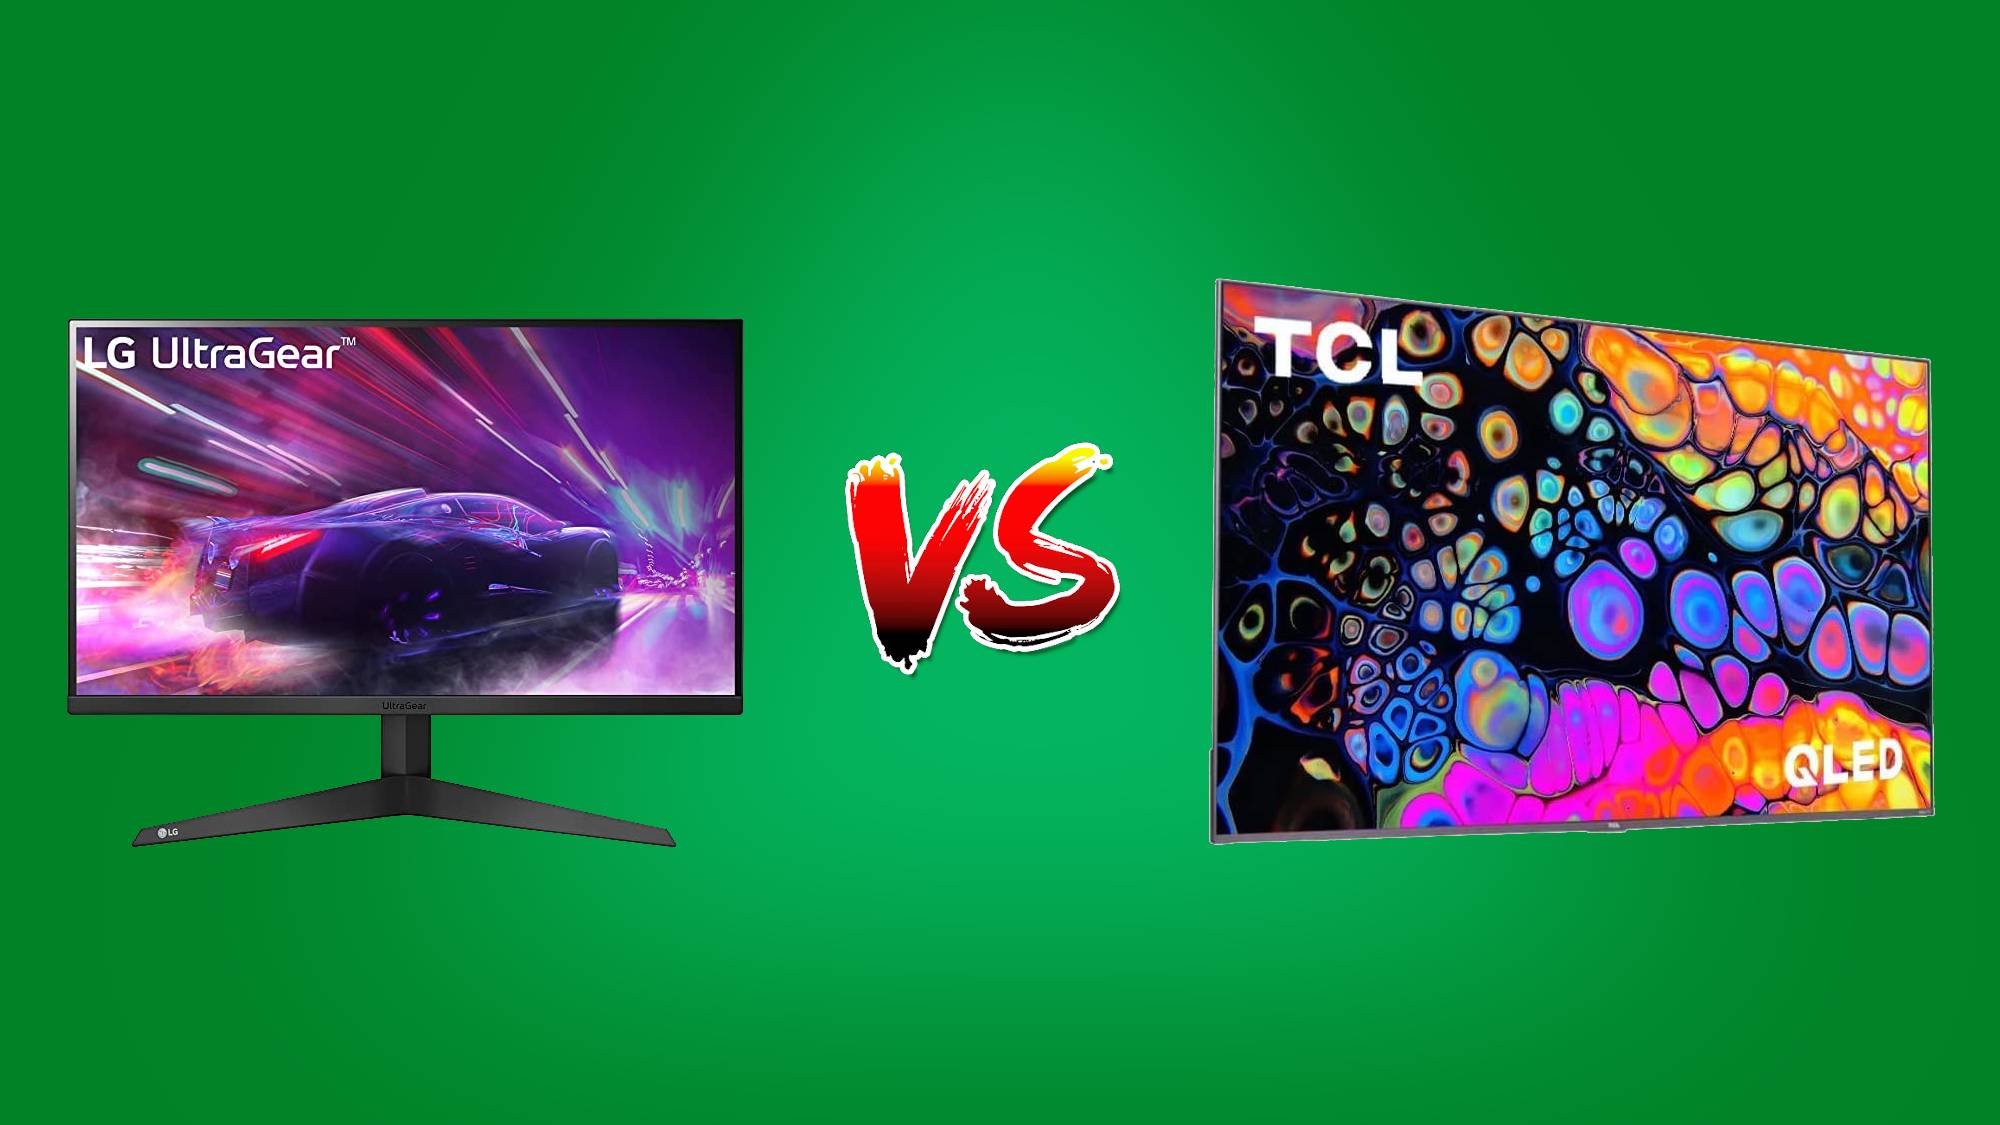 Gaming monitor vs gaming TV: which is the better home gaming